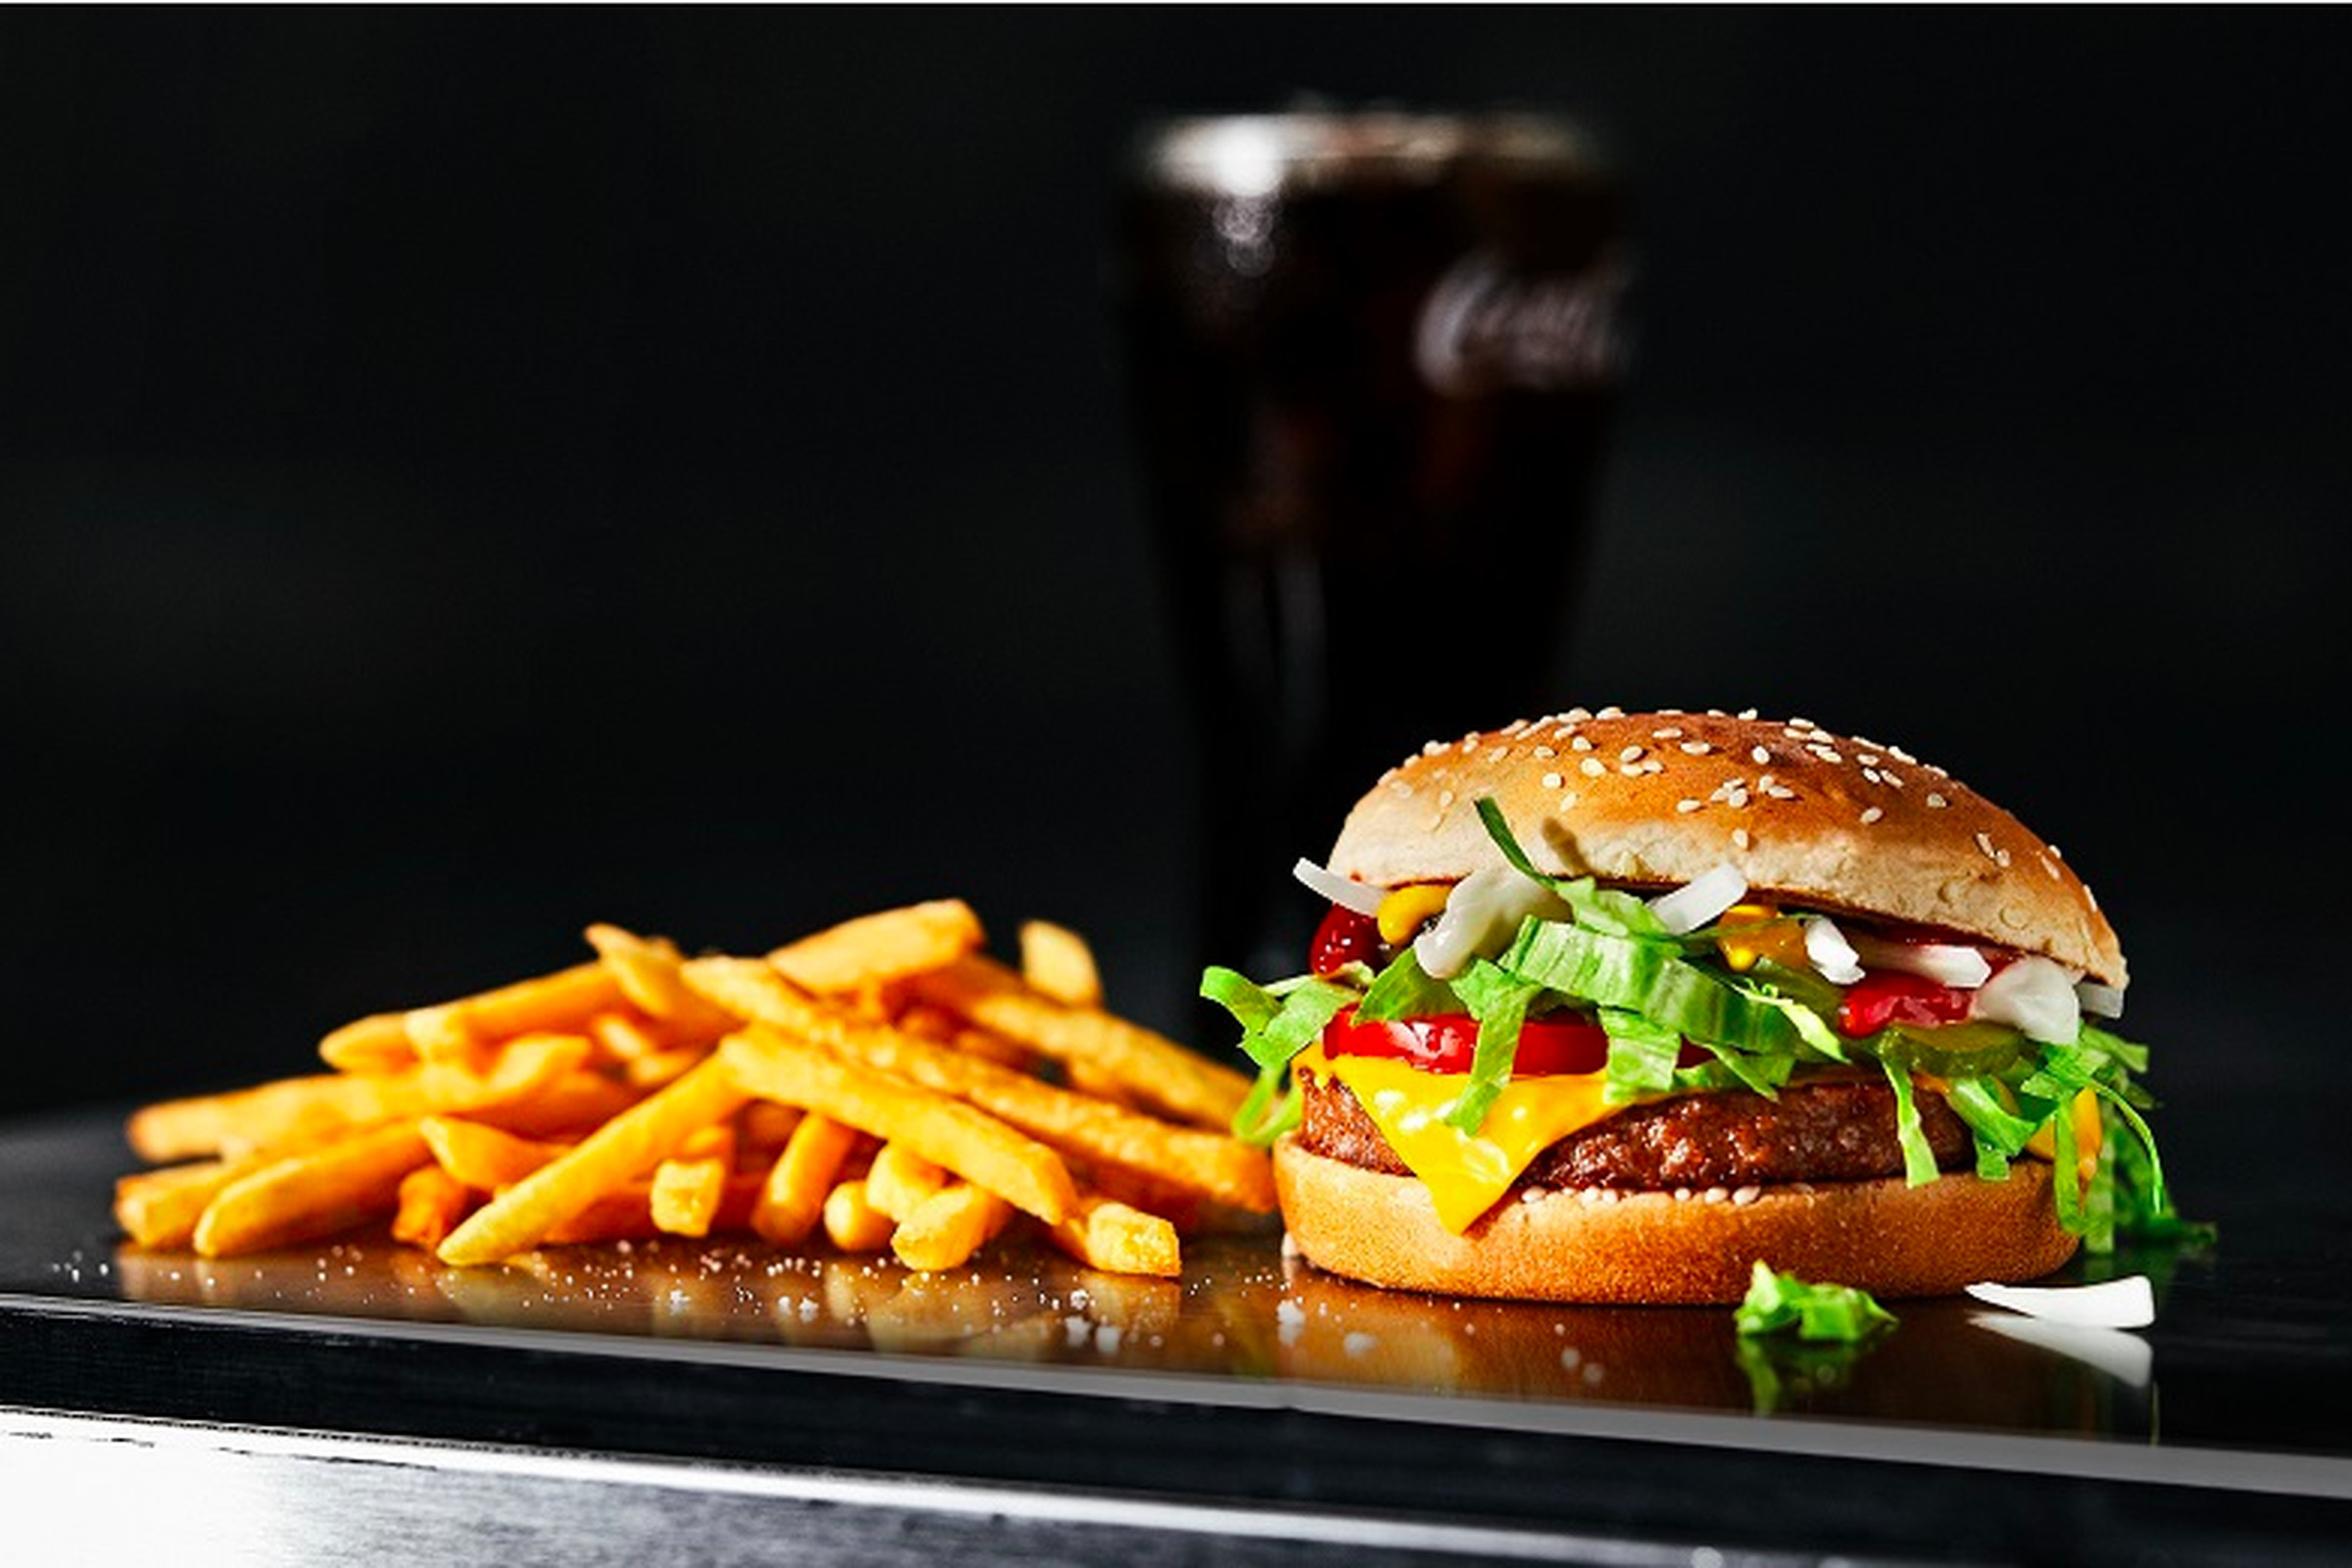 A photo of a burger, french fries, and a soda in front of a black background.